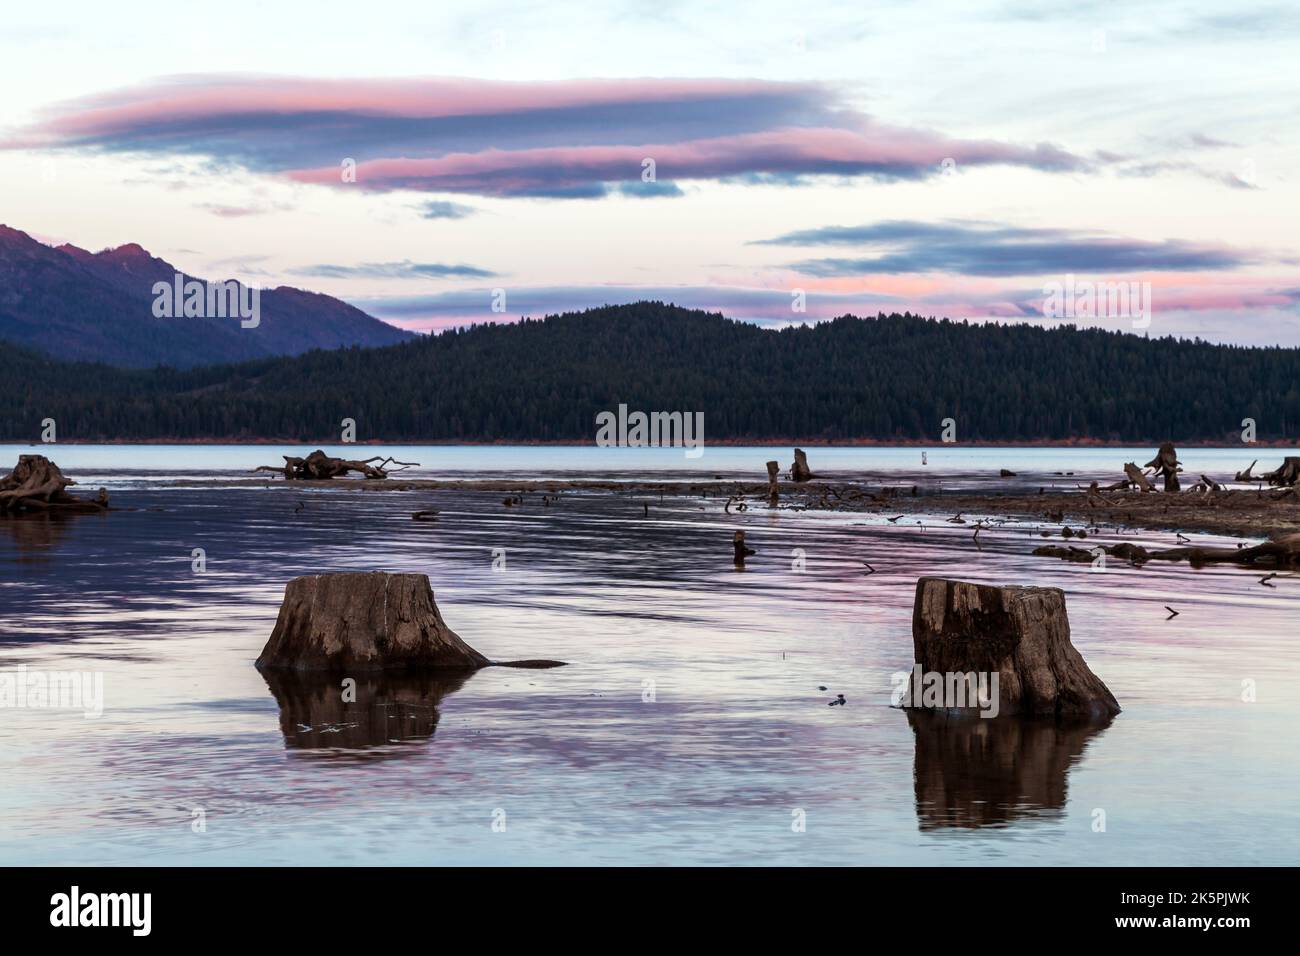 Drought in Northern California causes the water in Lake Almanor to recede exposing submerged tree trunks. Stock Photo